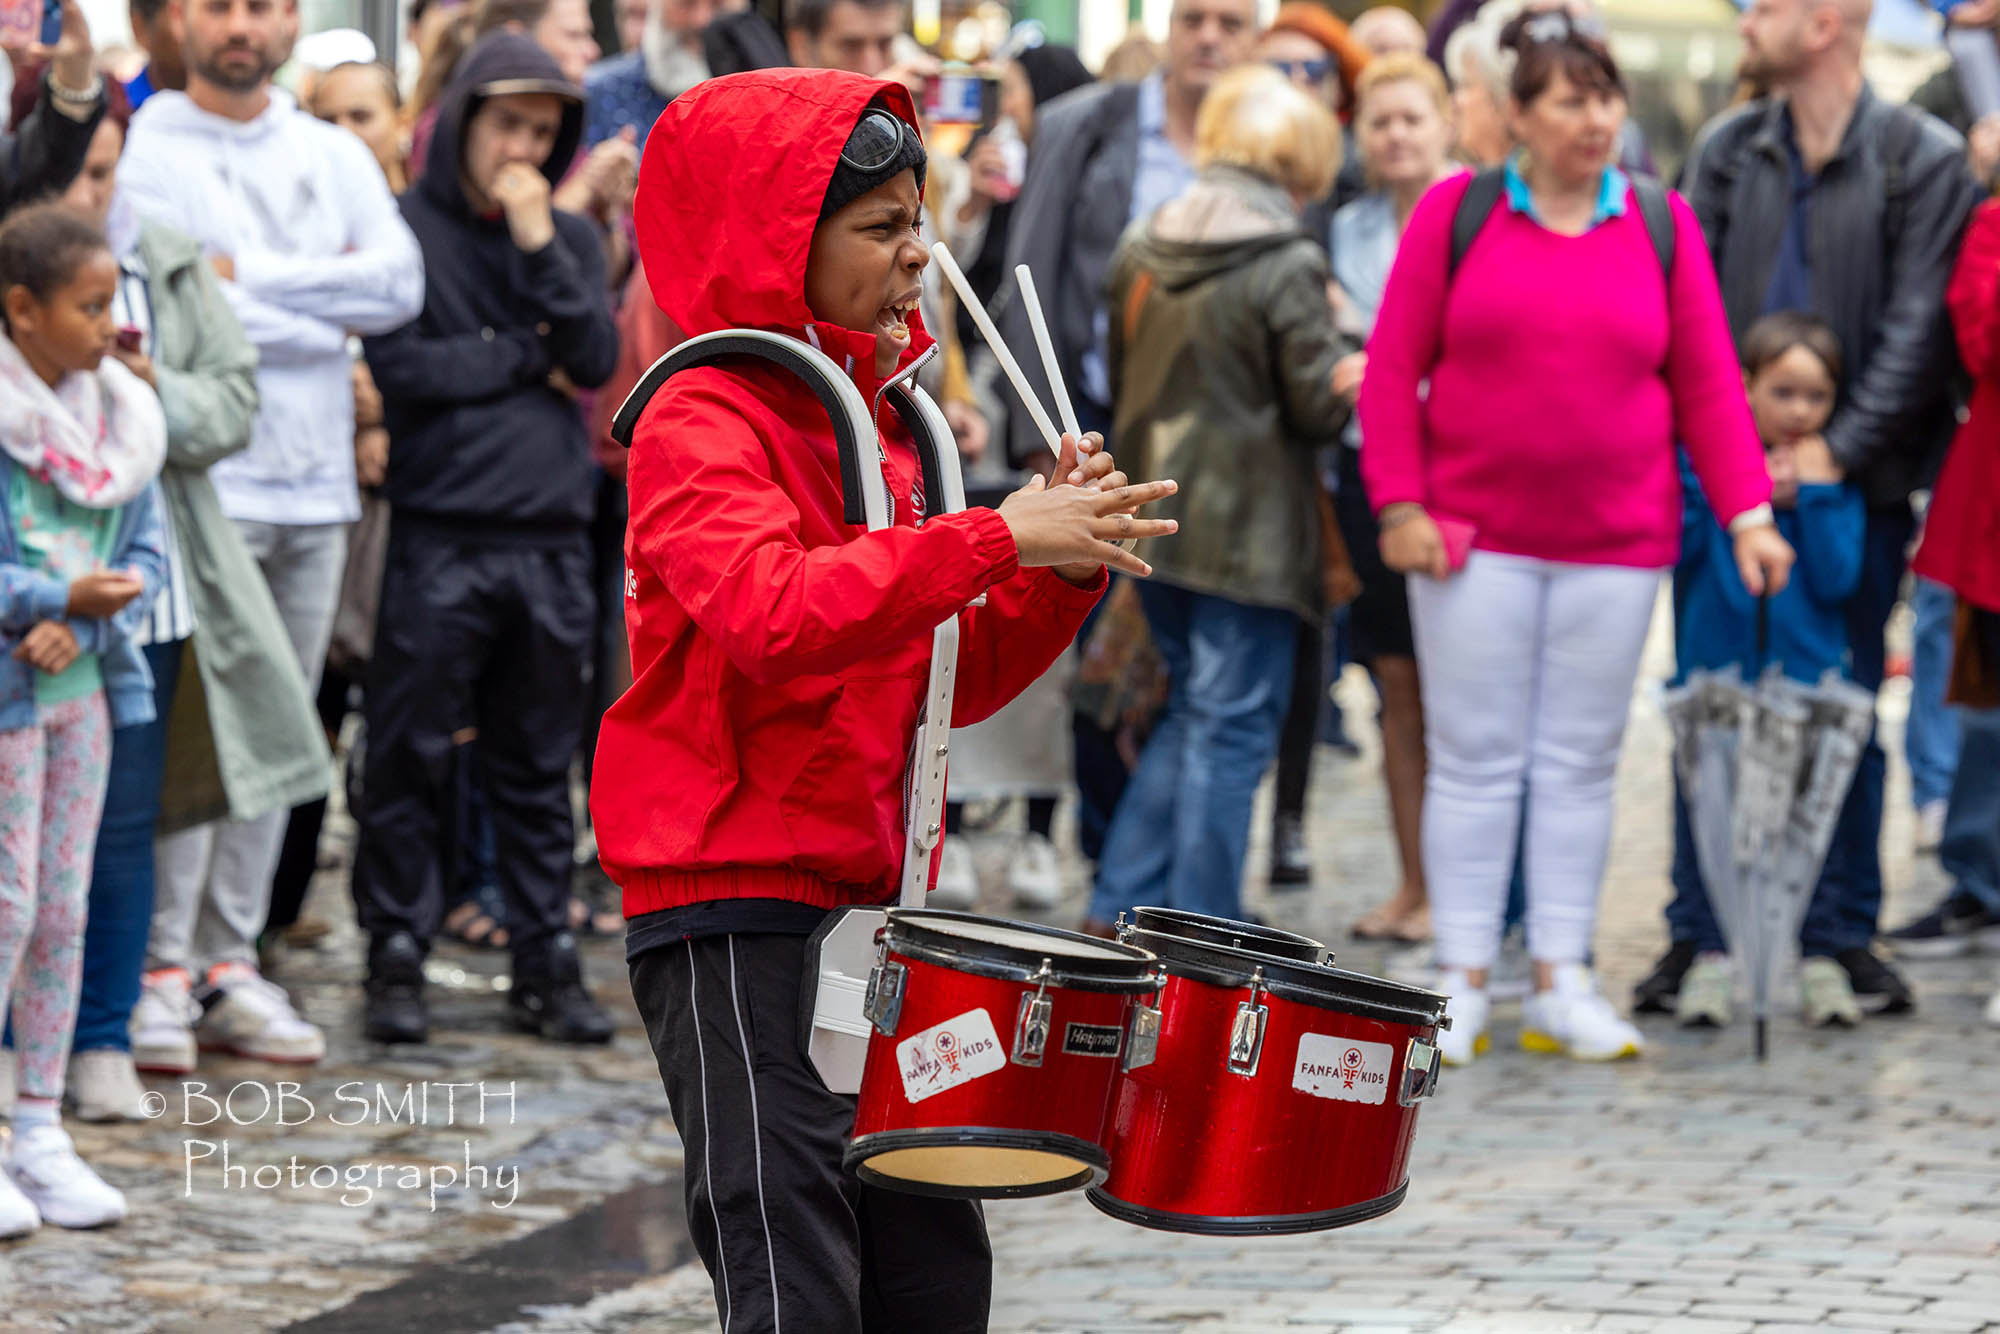 A young drummer performs on the streets of Brussels as part of the city's jazz weekend